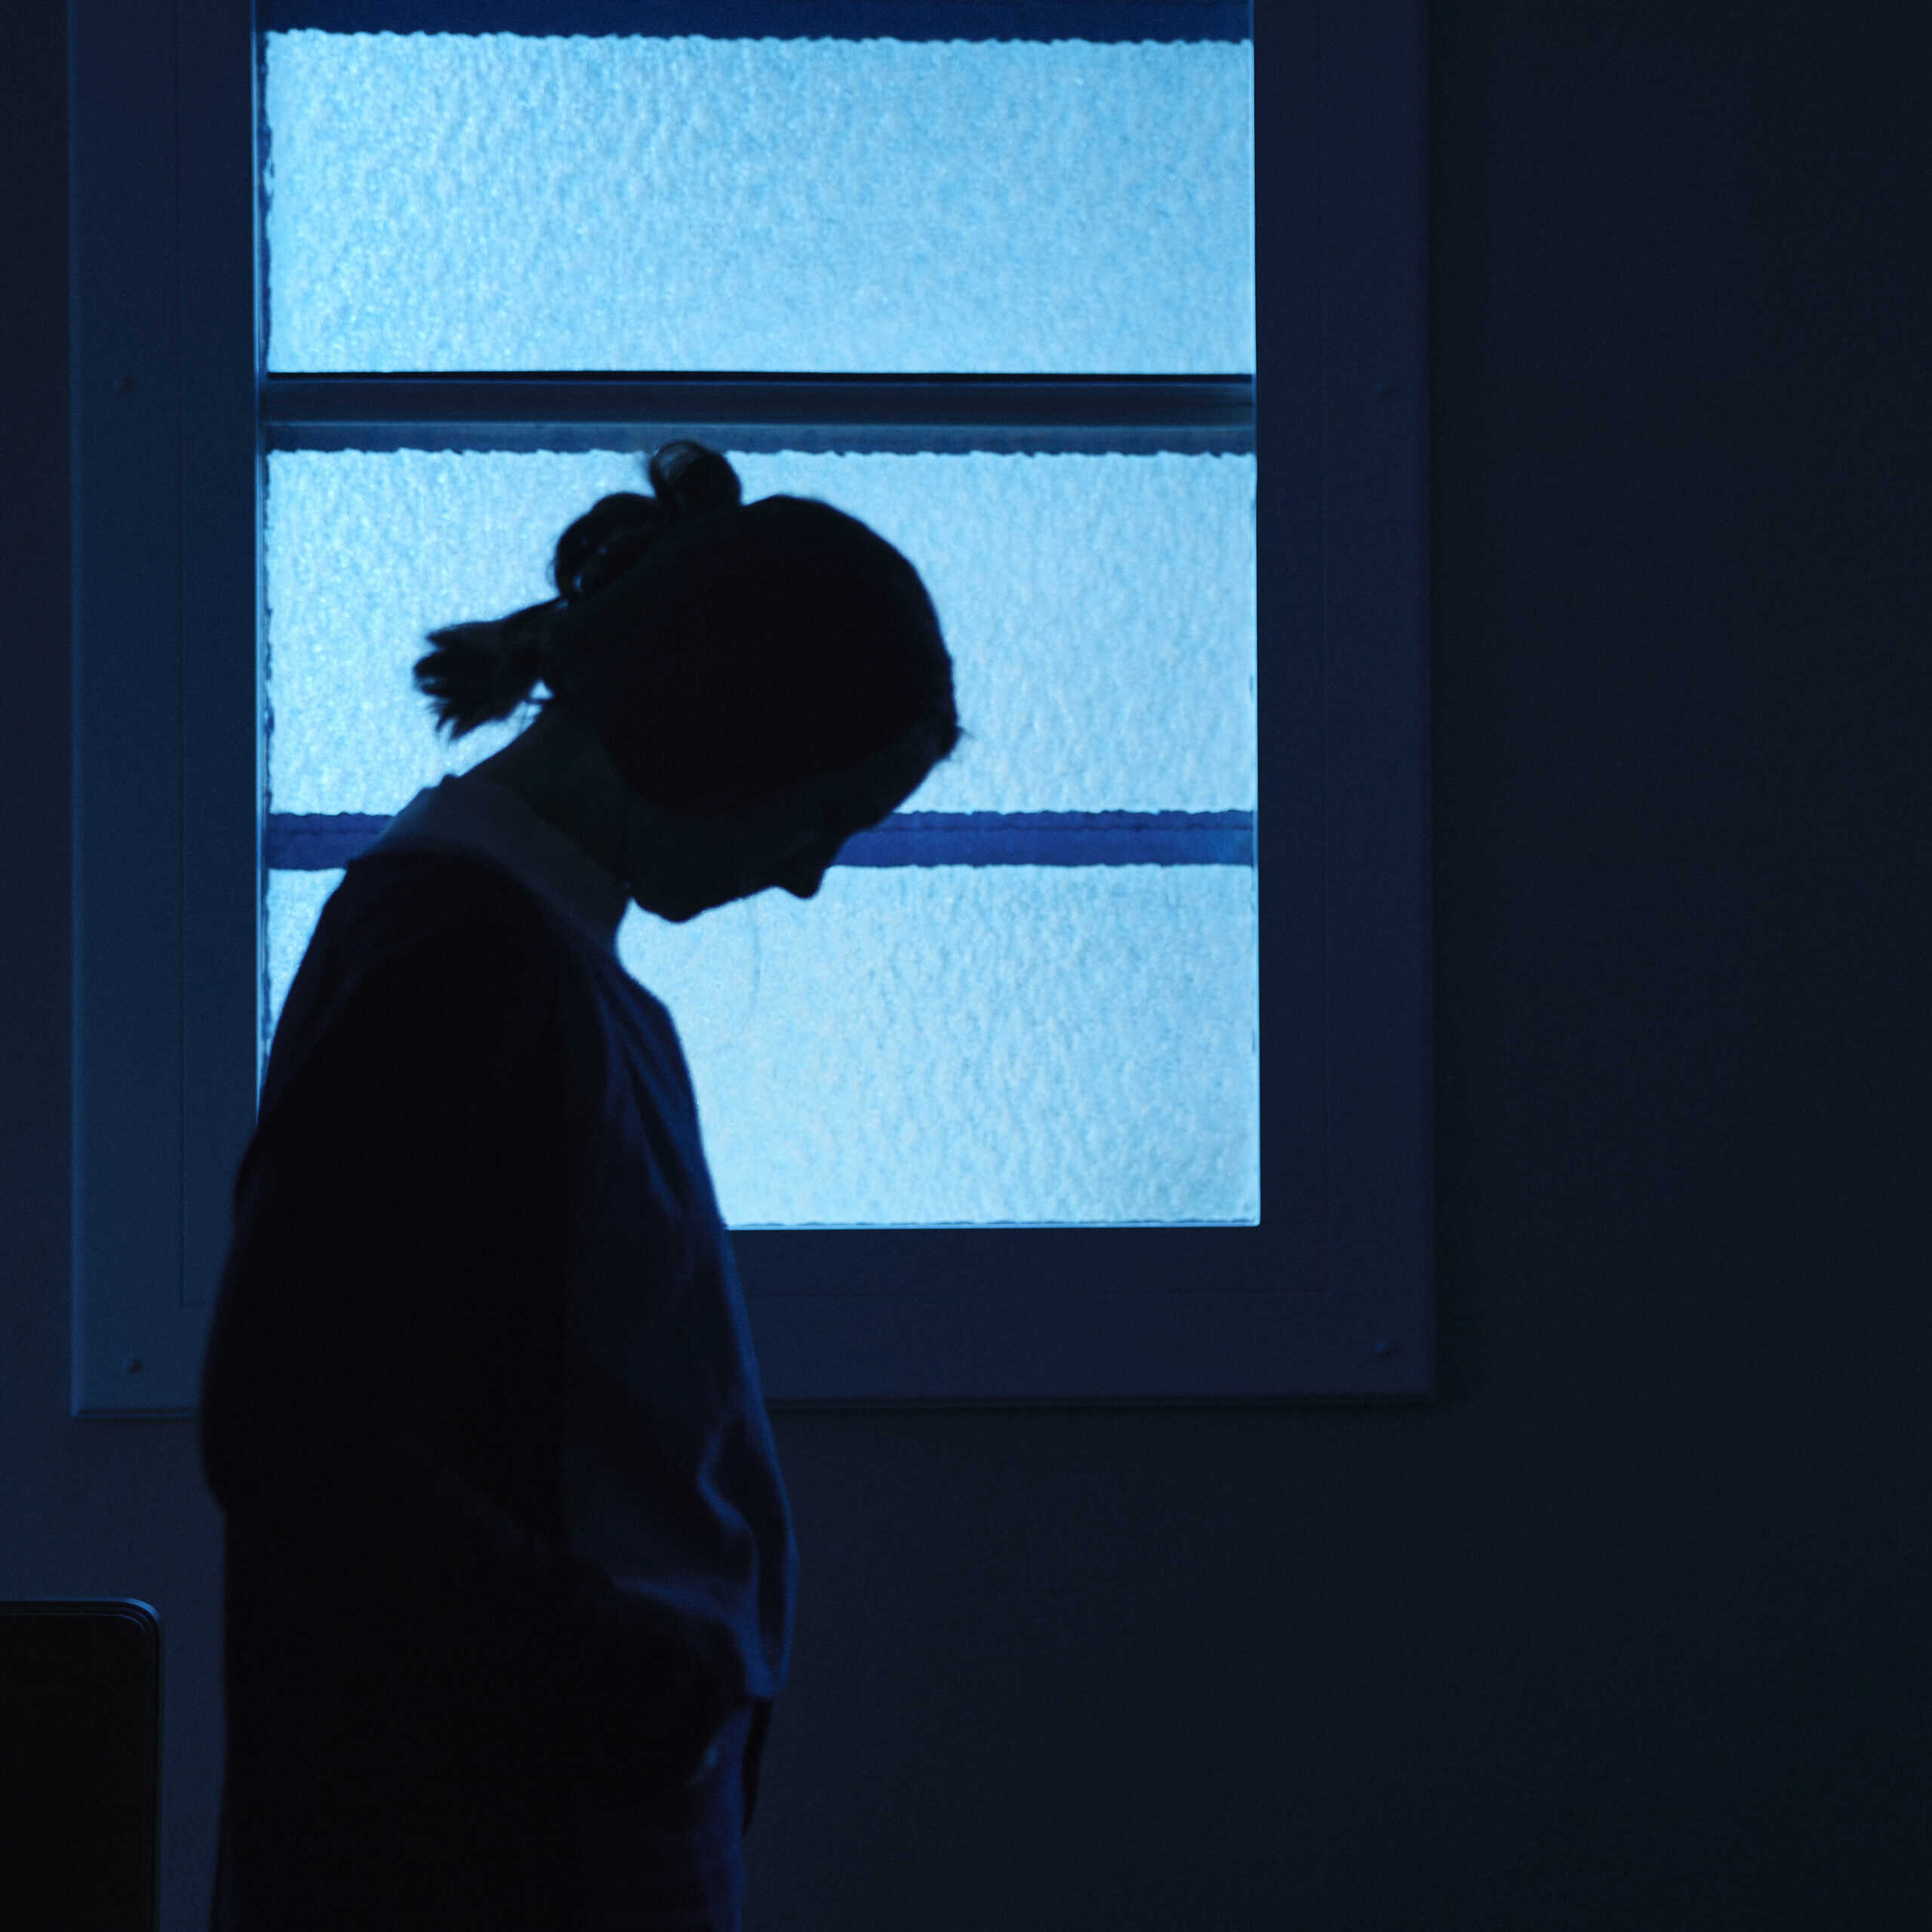 Silhouette of a person standing in front of a window